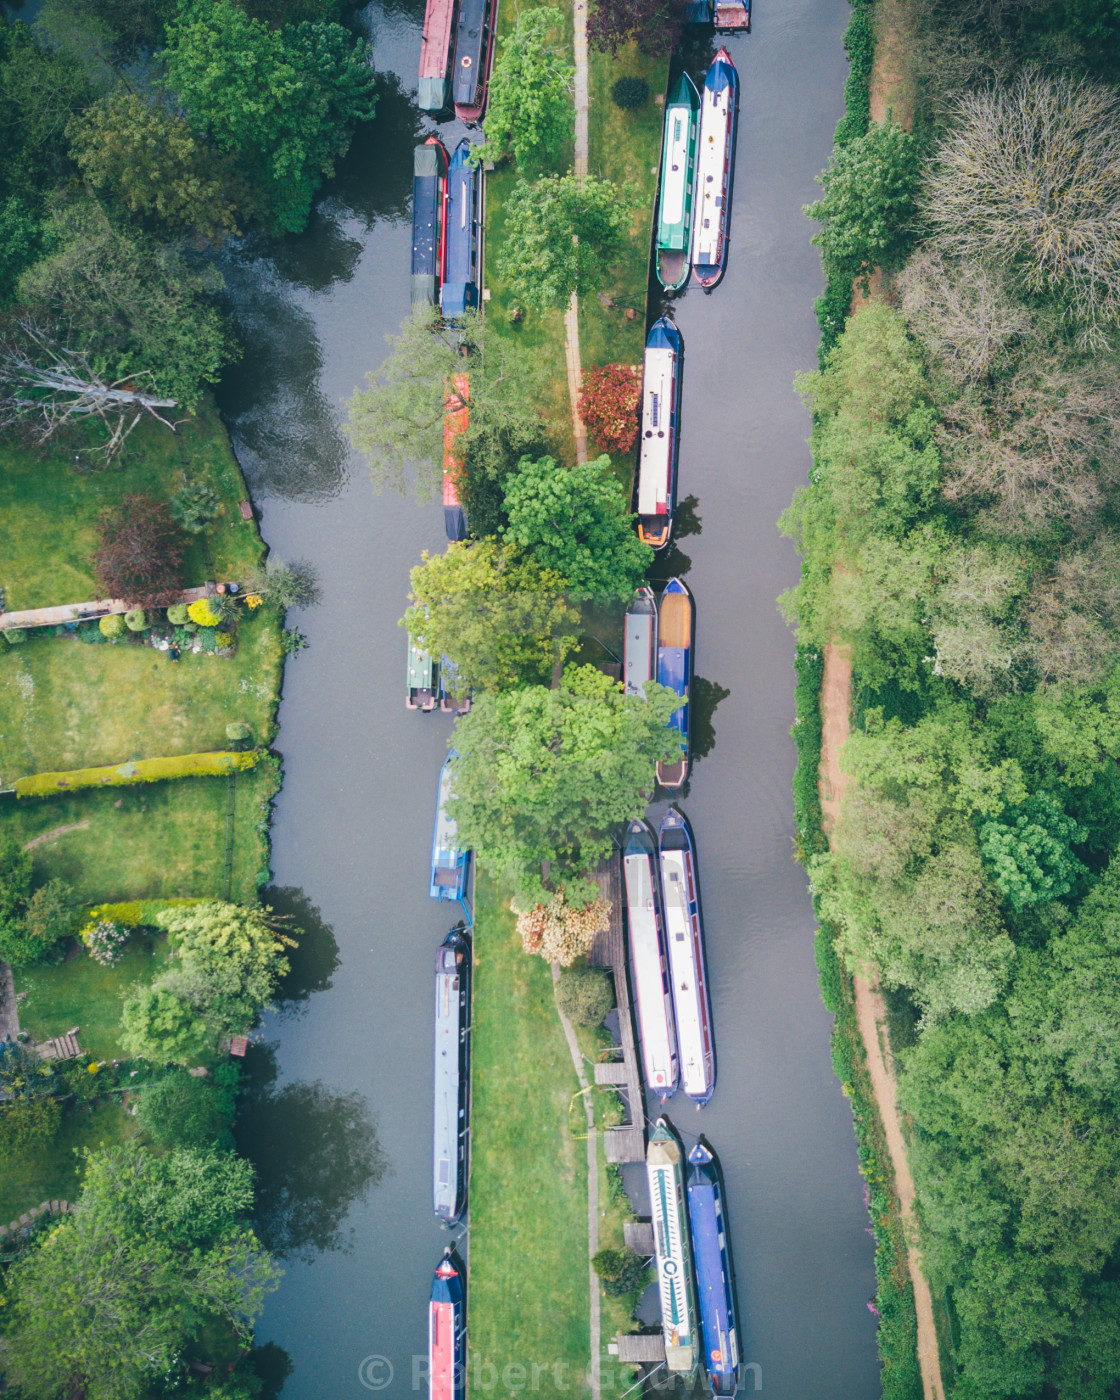 "Canal Boats" stock image